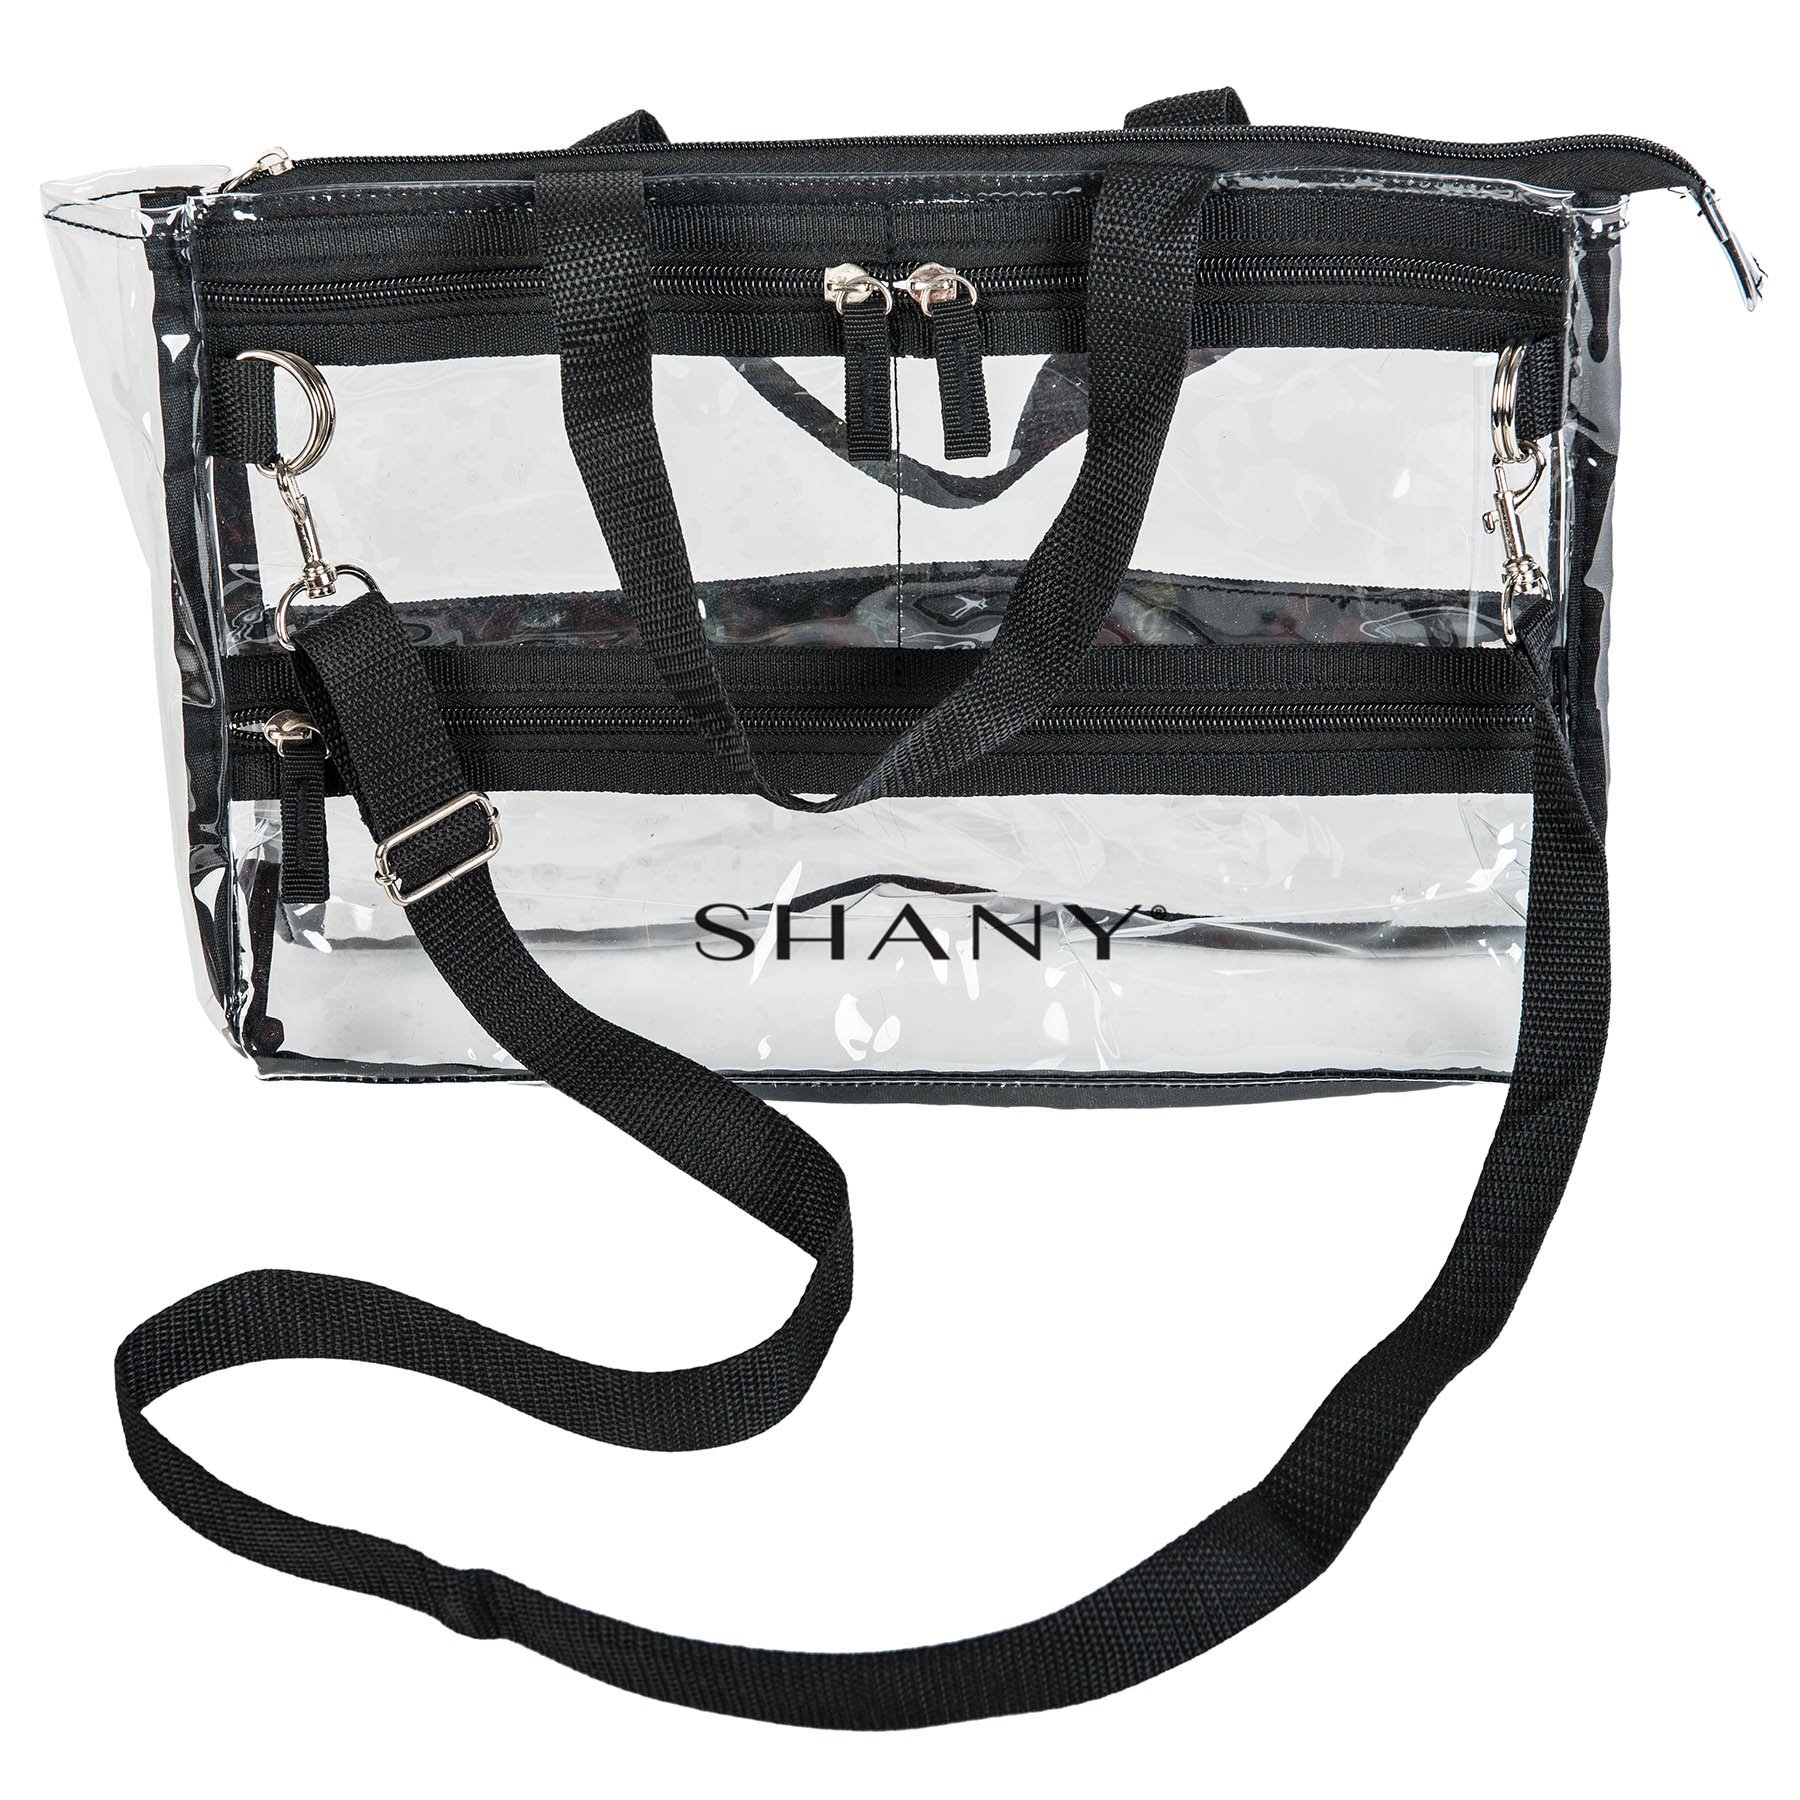 SHANY The Game Changer Travel Bag- Waterproof Storage for at Home or Travel Use